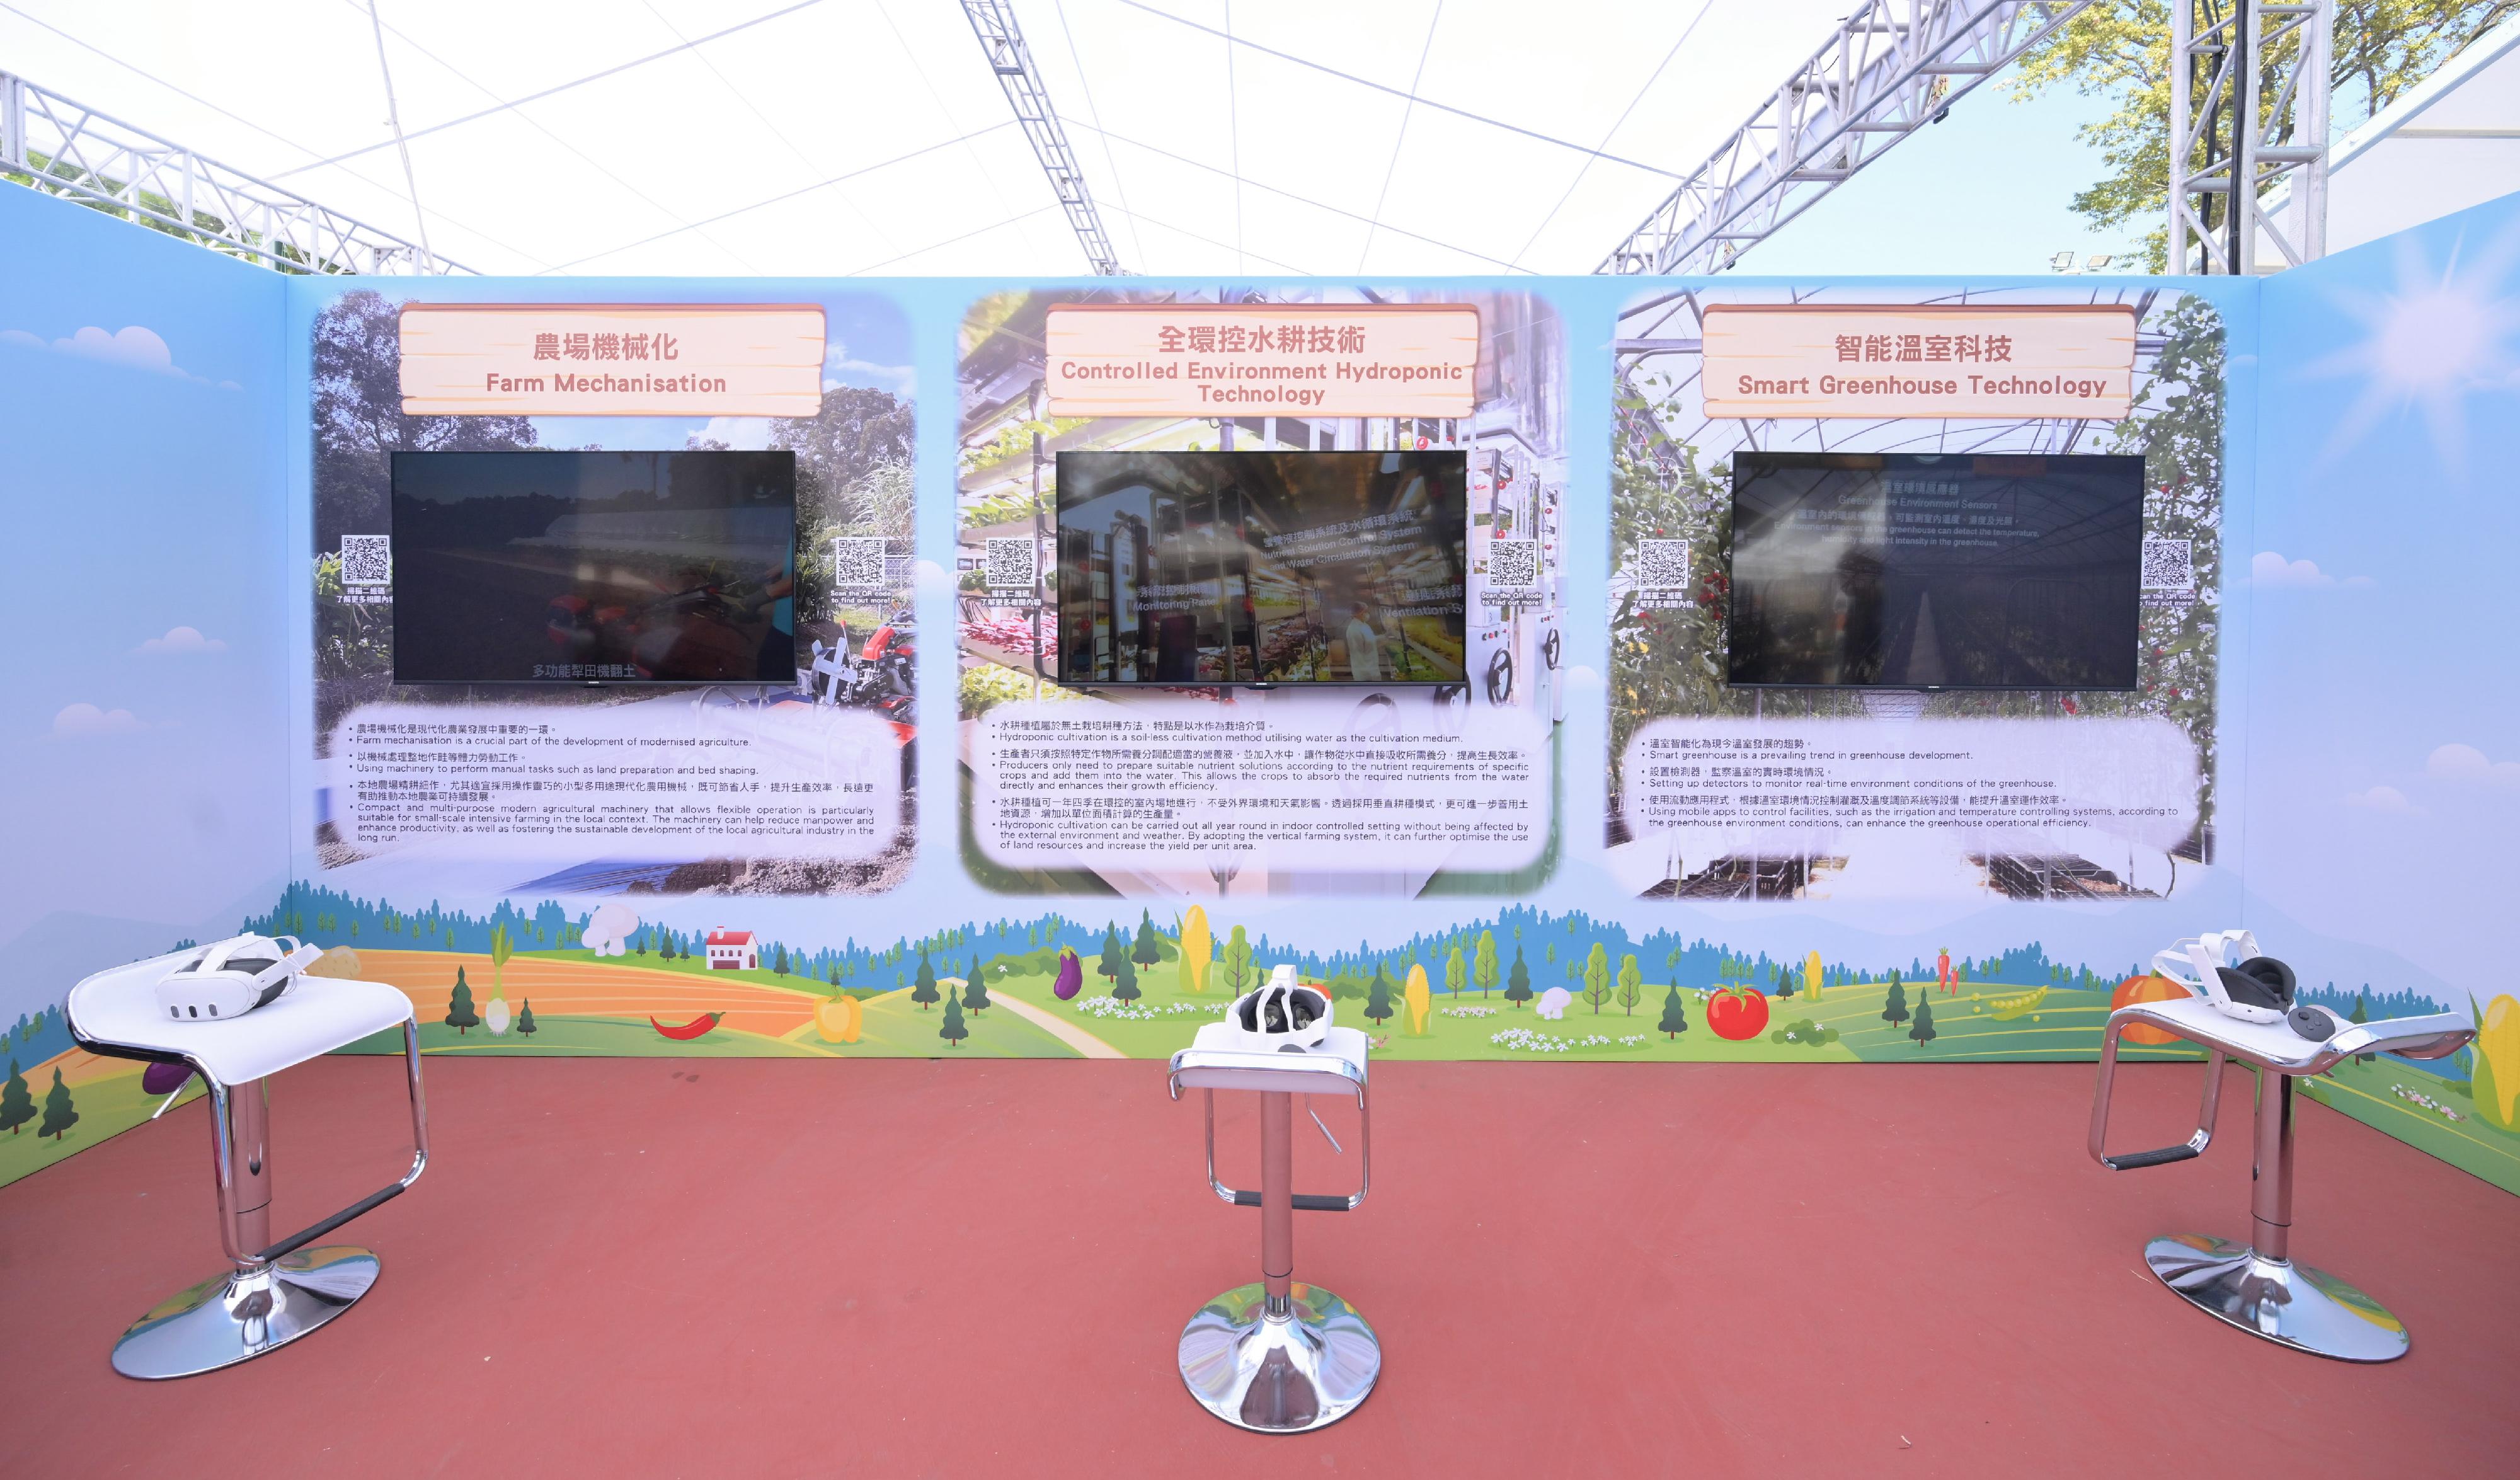 FarmFest 2024 runs for three consecutive days between today (January 5) and January 7 at Fa Hui Park in Mong Kok to showcase a variety of local agricultural and fisheries products and other goods. Photo shows modern farming technologies, including controlled environment hydroponic technology, farm mechanisation and smart greenhouse technology, introduced through virtual reality in the agricultural zone.